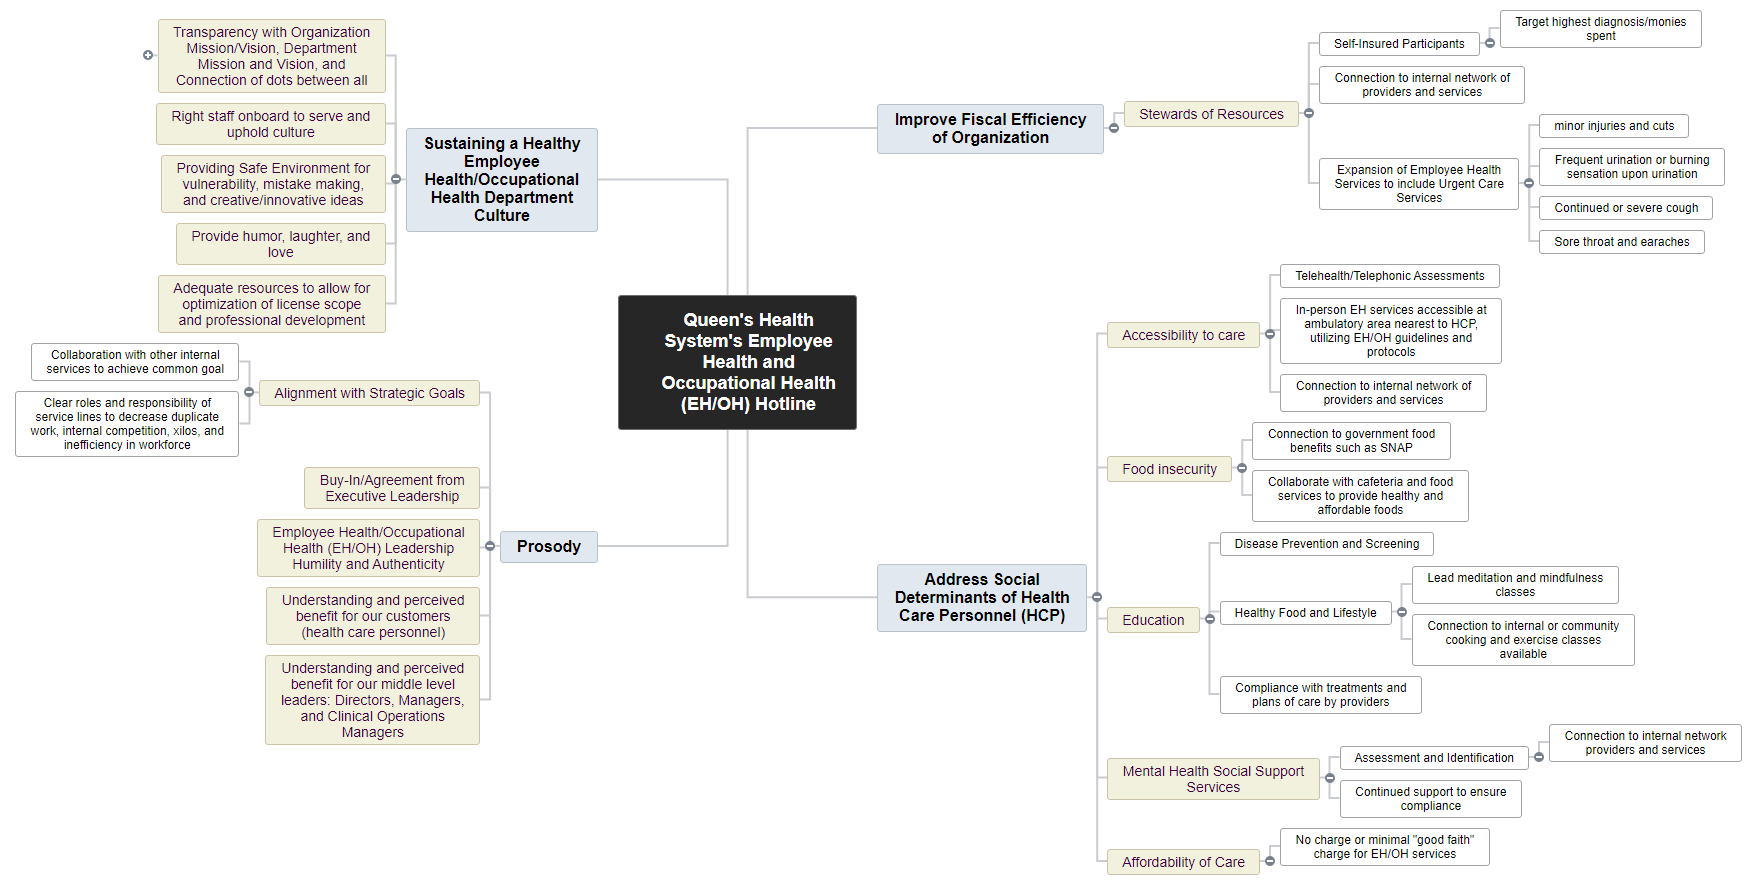 Queen's Health System's Employee Health and Occupational Health (EH_OH) Hotline1 Mind Map